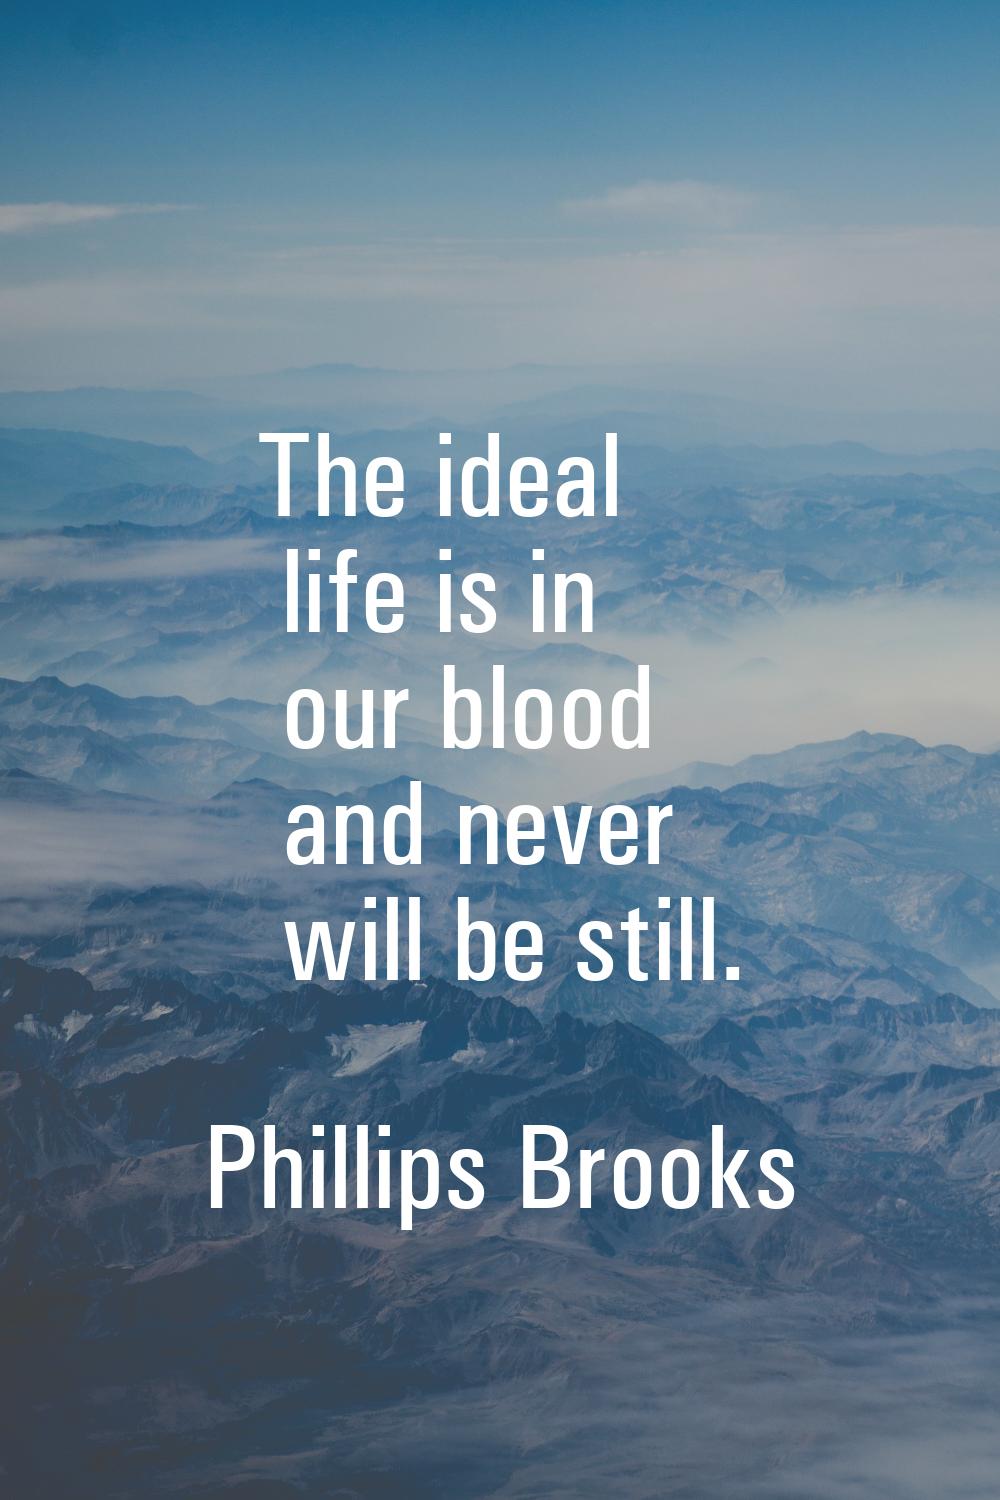 The ideal life is in our blood and never will be still.